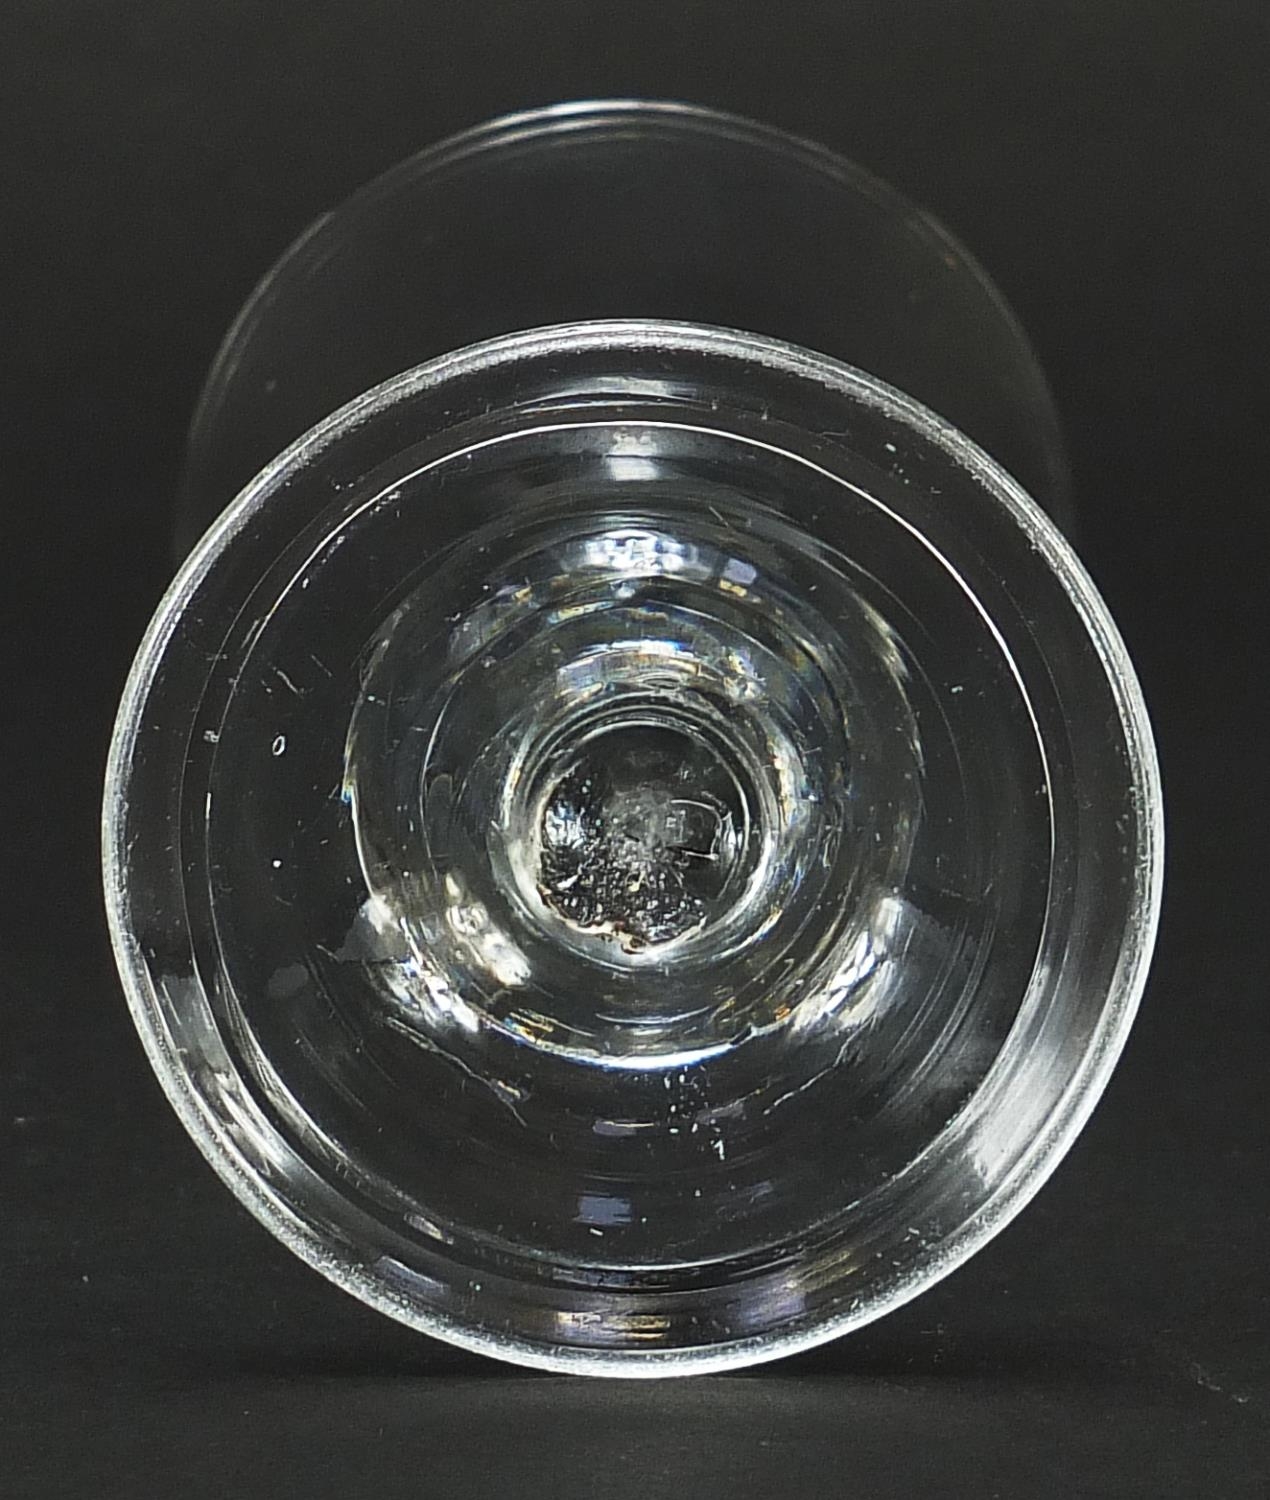 Early 18th century wine glass with folded foot and knopped stem, 12.5cm high - Image 3 of 3